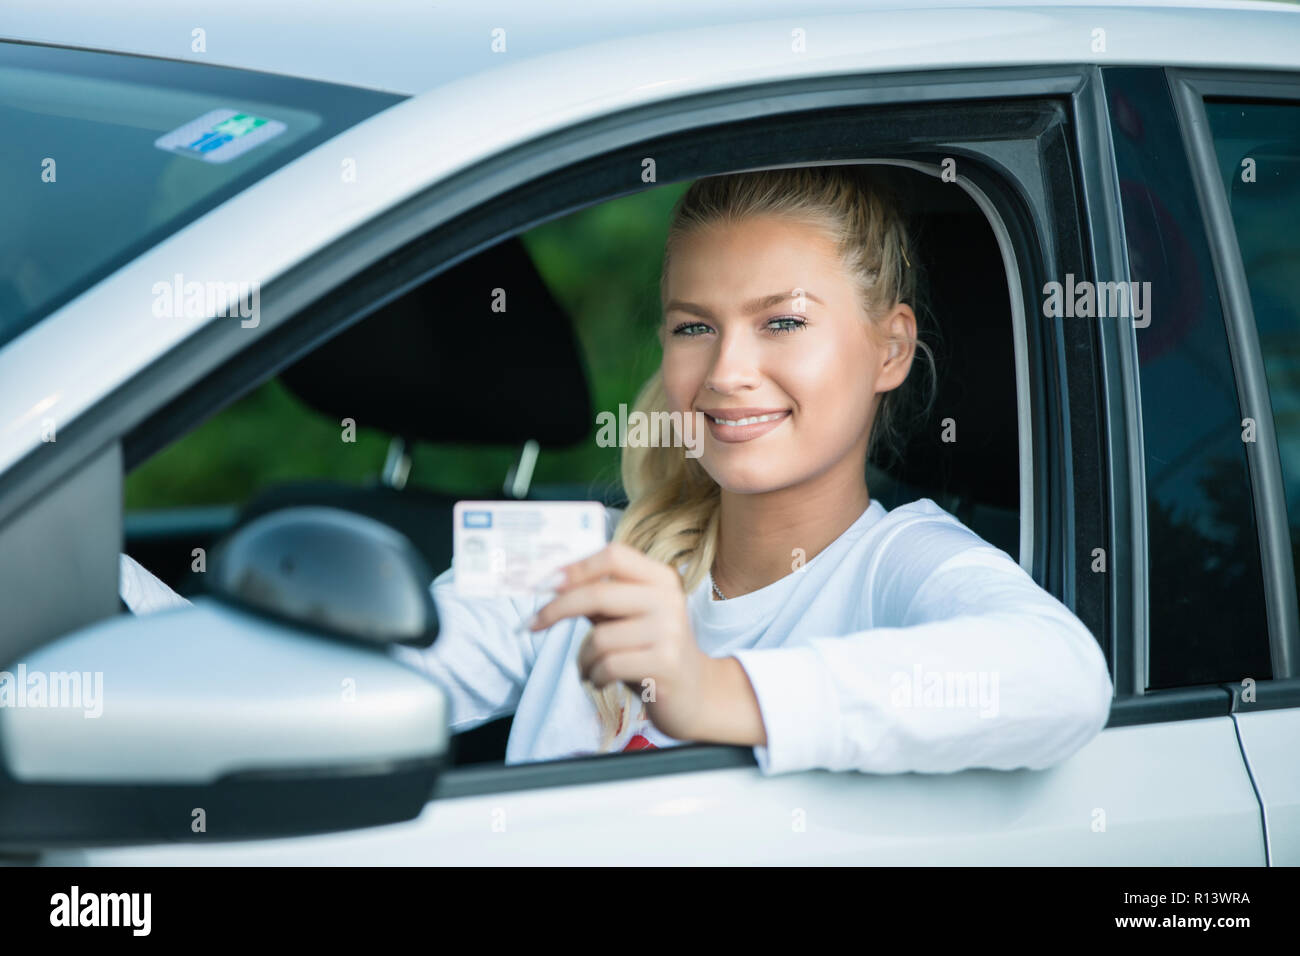 Driving school. Attractive young woman proudly showing her drivers license. Free space for text. Copy space. Stock Photo